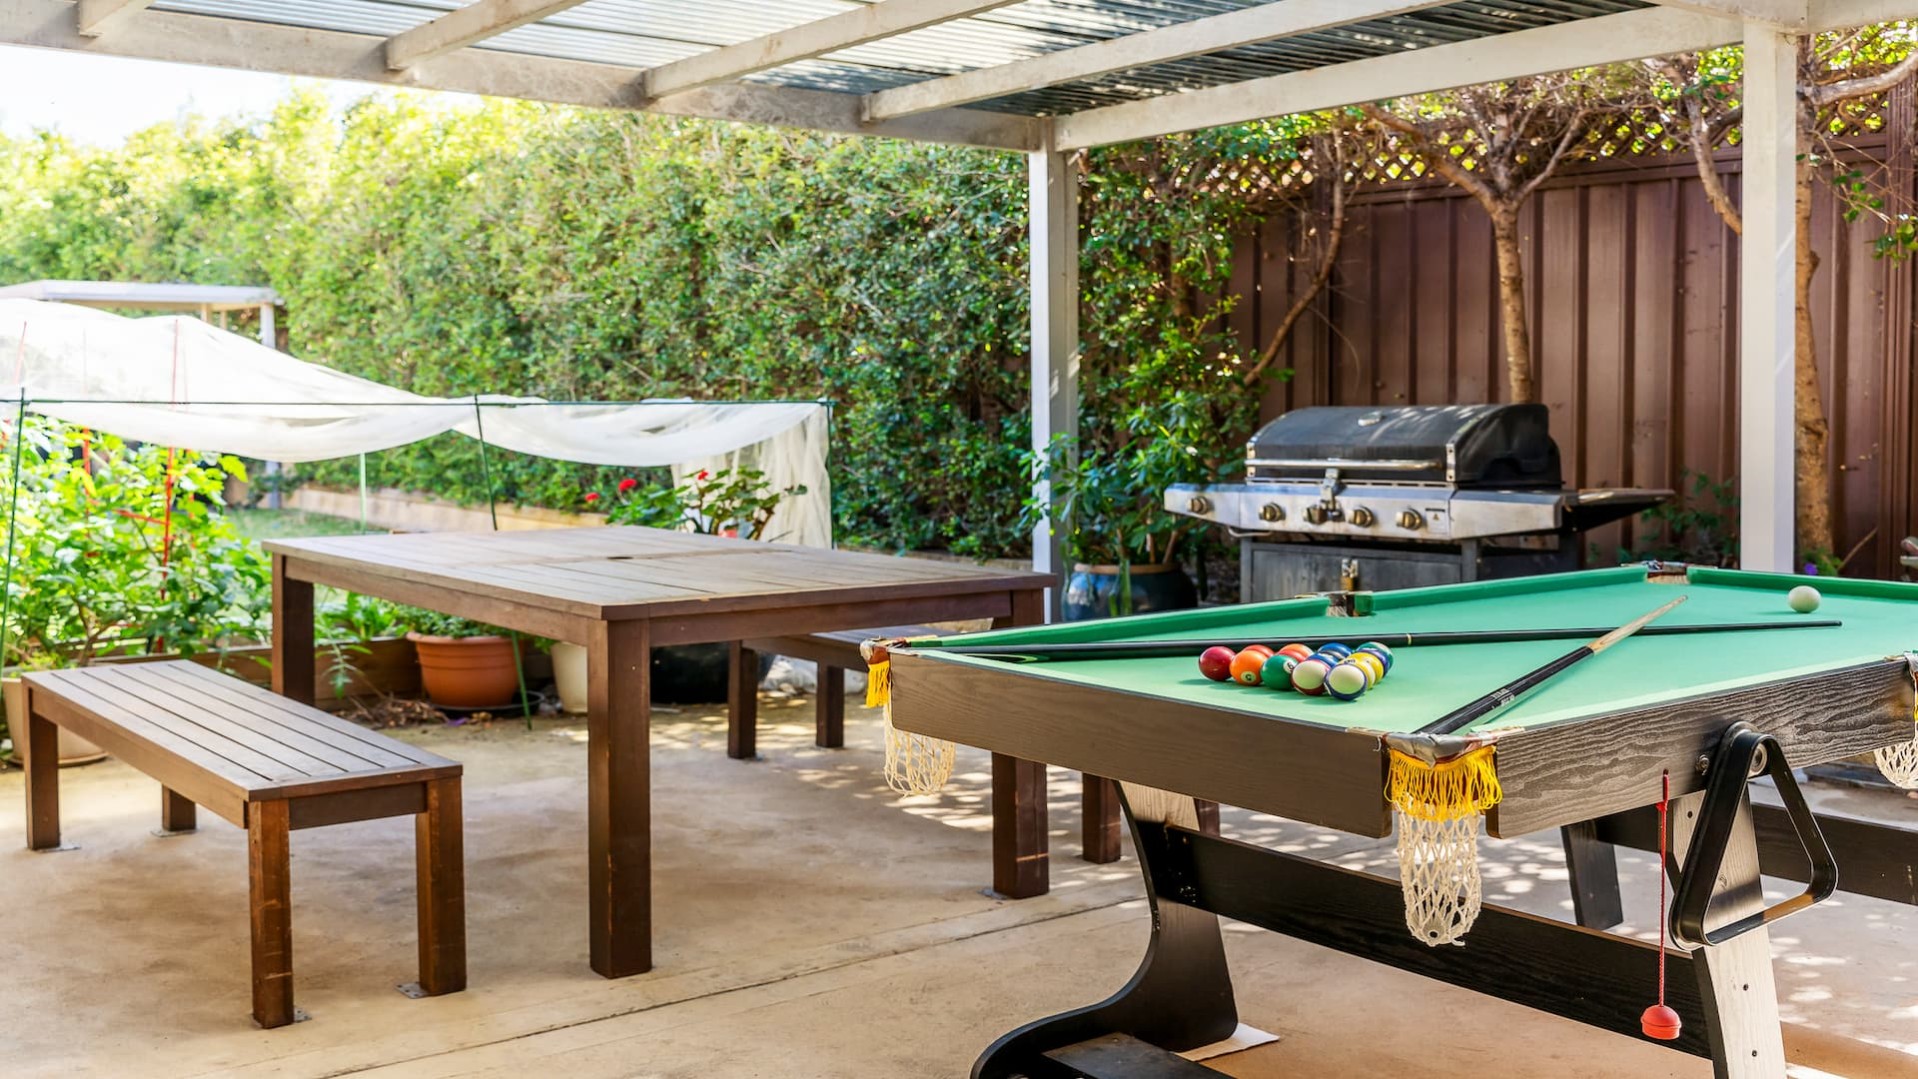 undercover patio with outdoor table and chairs, BBQ, pool table overlooking garden beds and hedge.